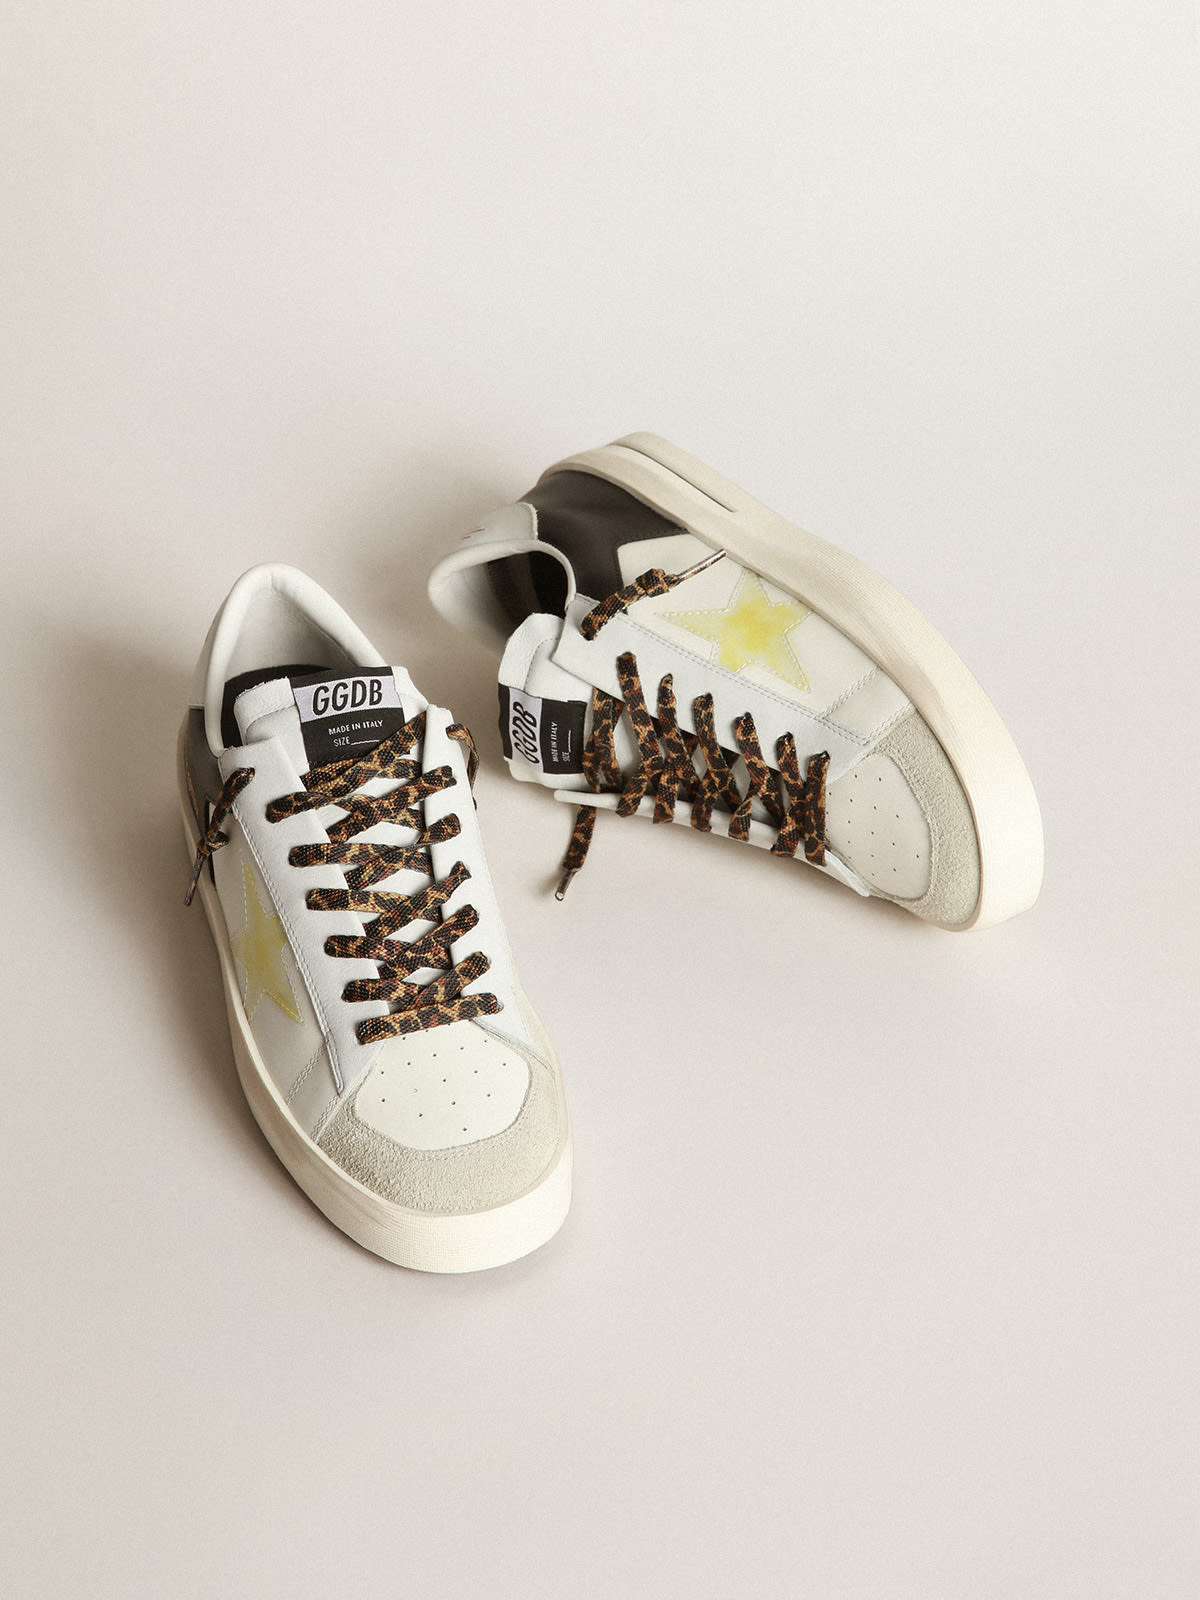 Golden Goose - Stardan LTD sneakers in black and white leather with yellowed-effect transparent PVC star in 